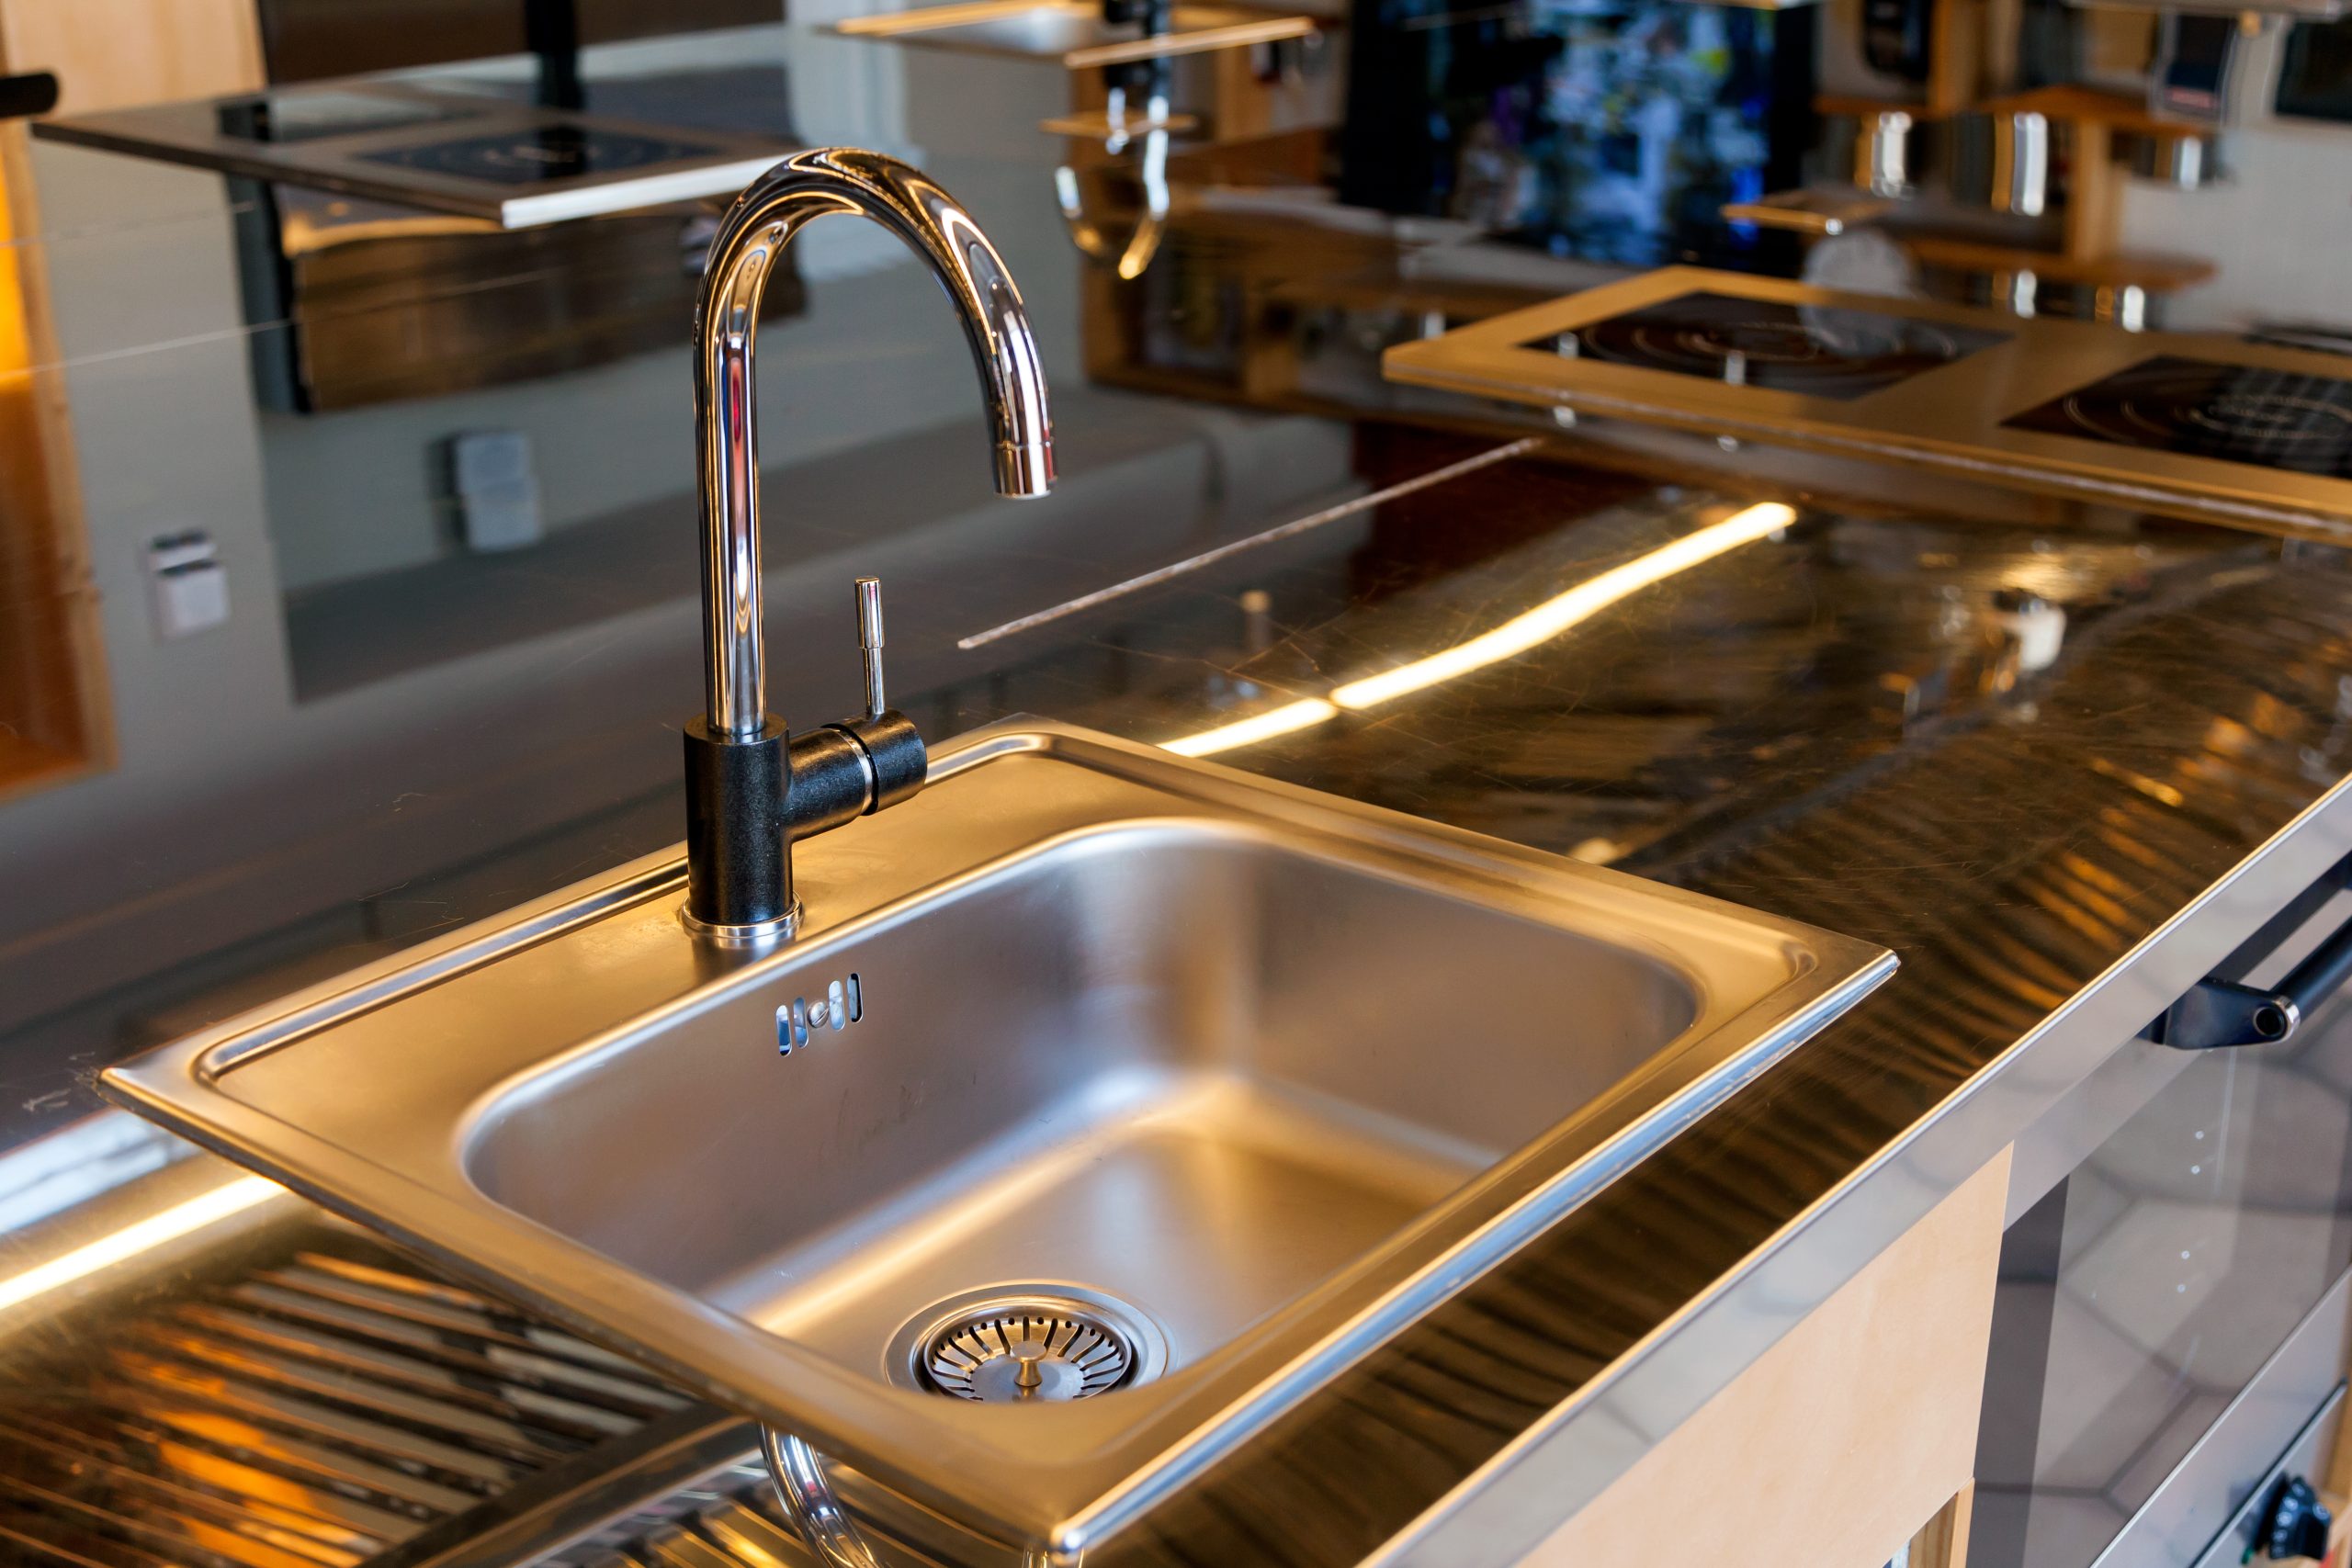 House cleaning service tips for sinks